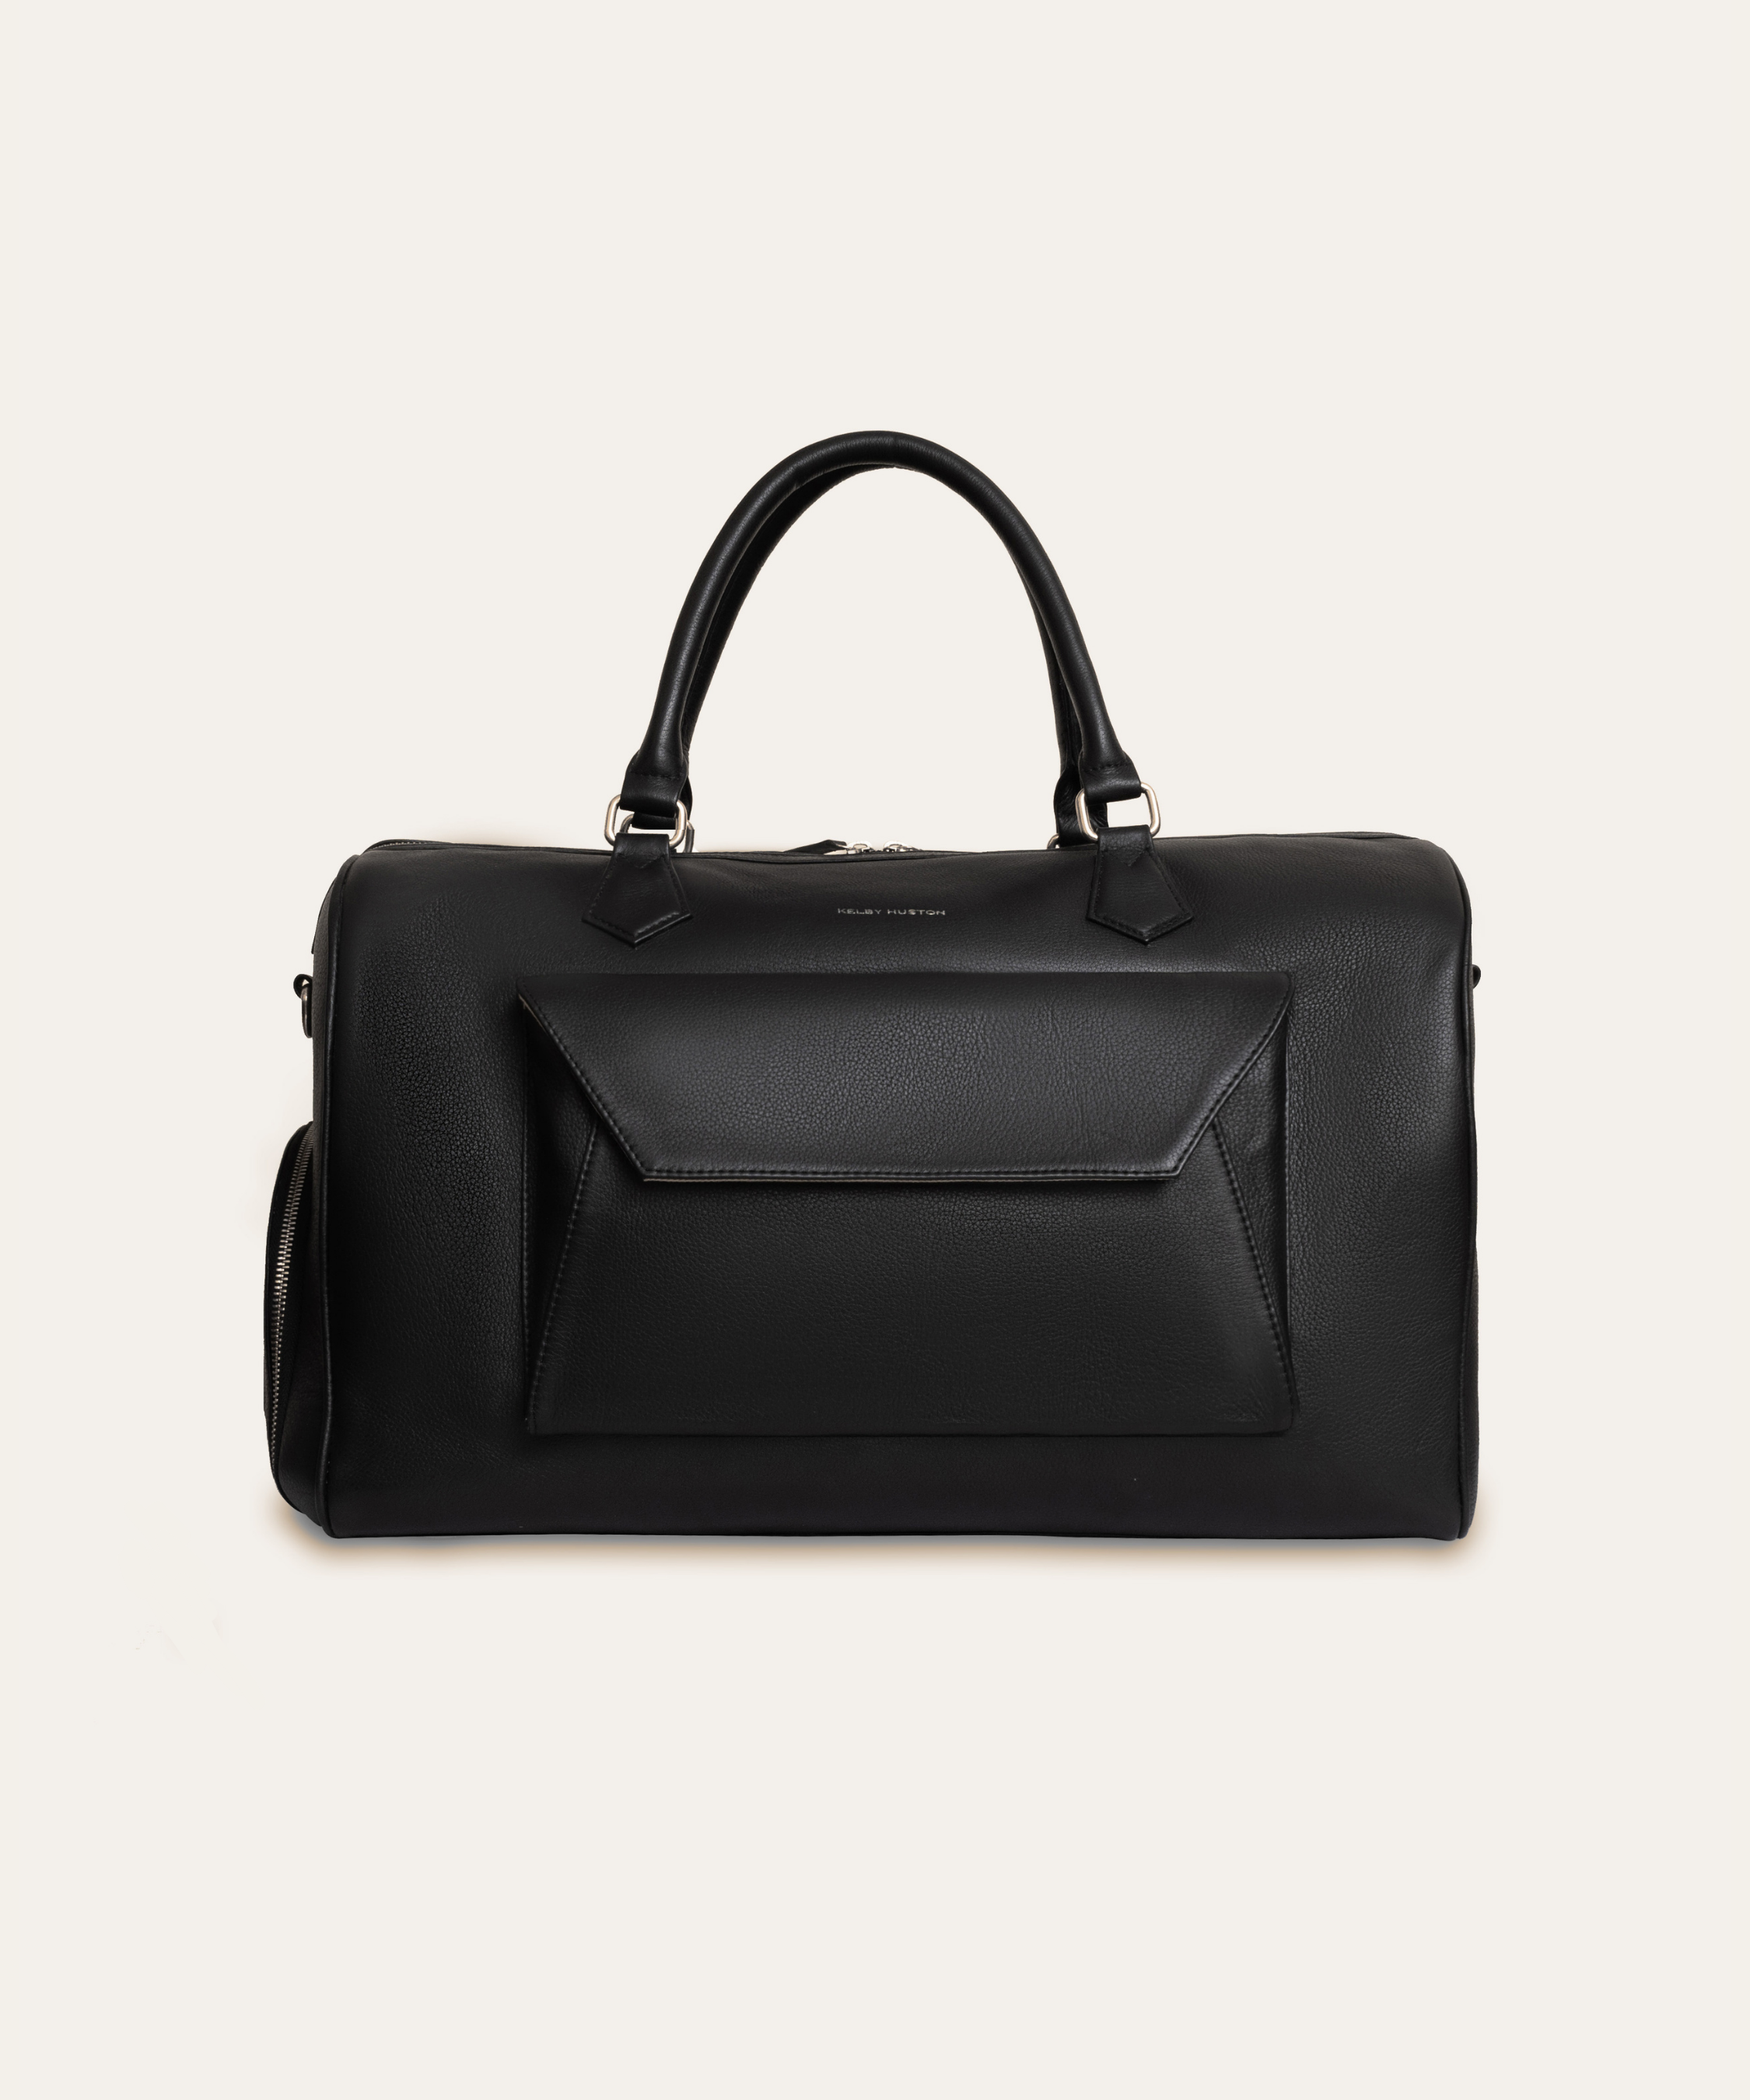 AION DUFFLE BAG - BLACK, a product by Kelby Huston